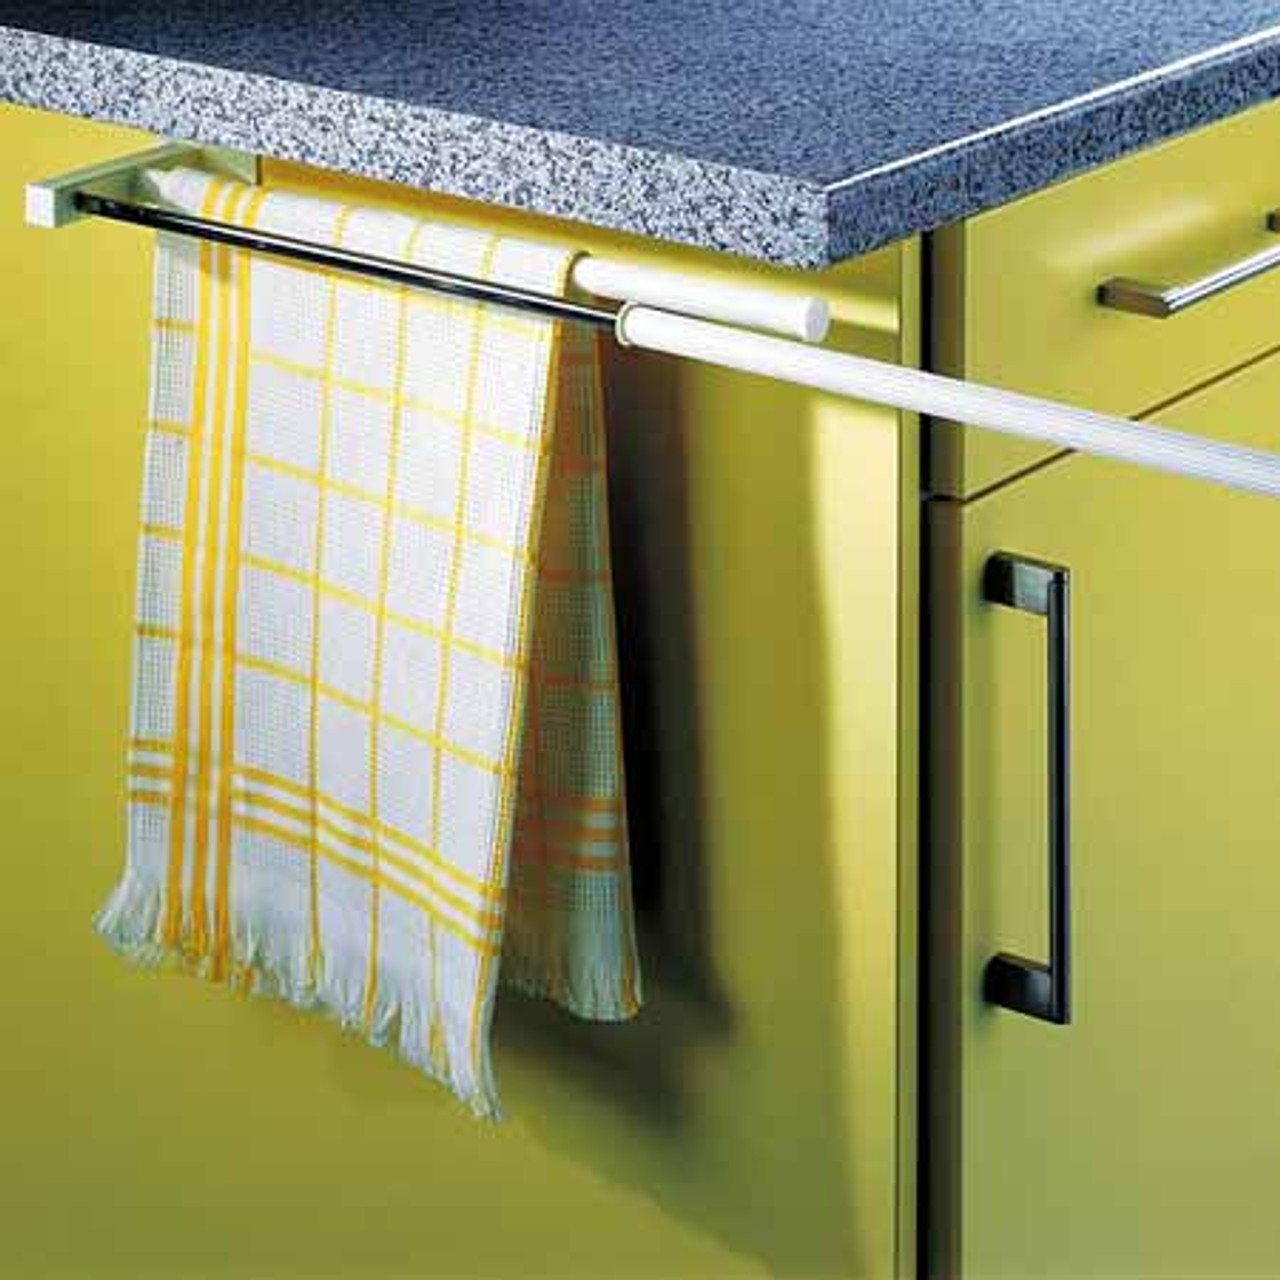 White Pull-Out and Swivel Towel Rack RLU-314330